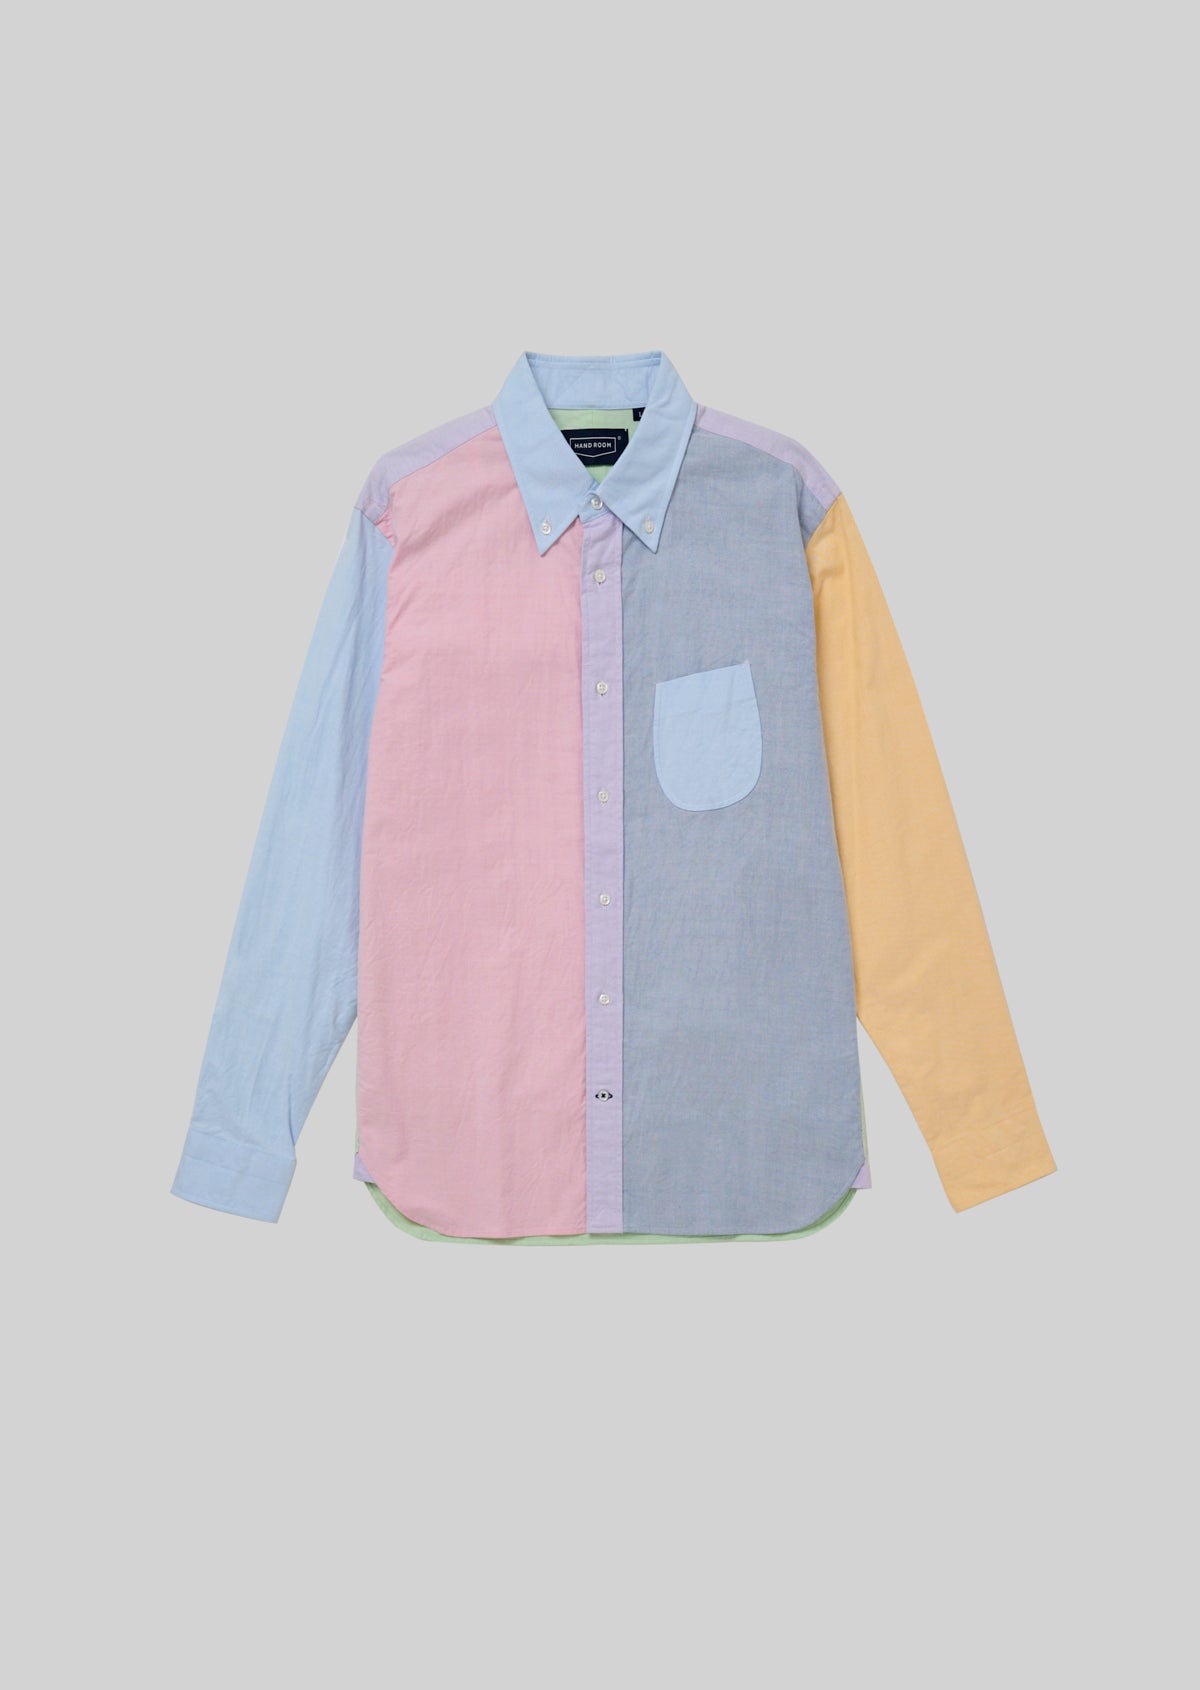 OX FORD BUTTON DOWN SHIRTS CRAZY　8093-1101